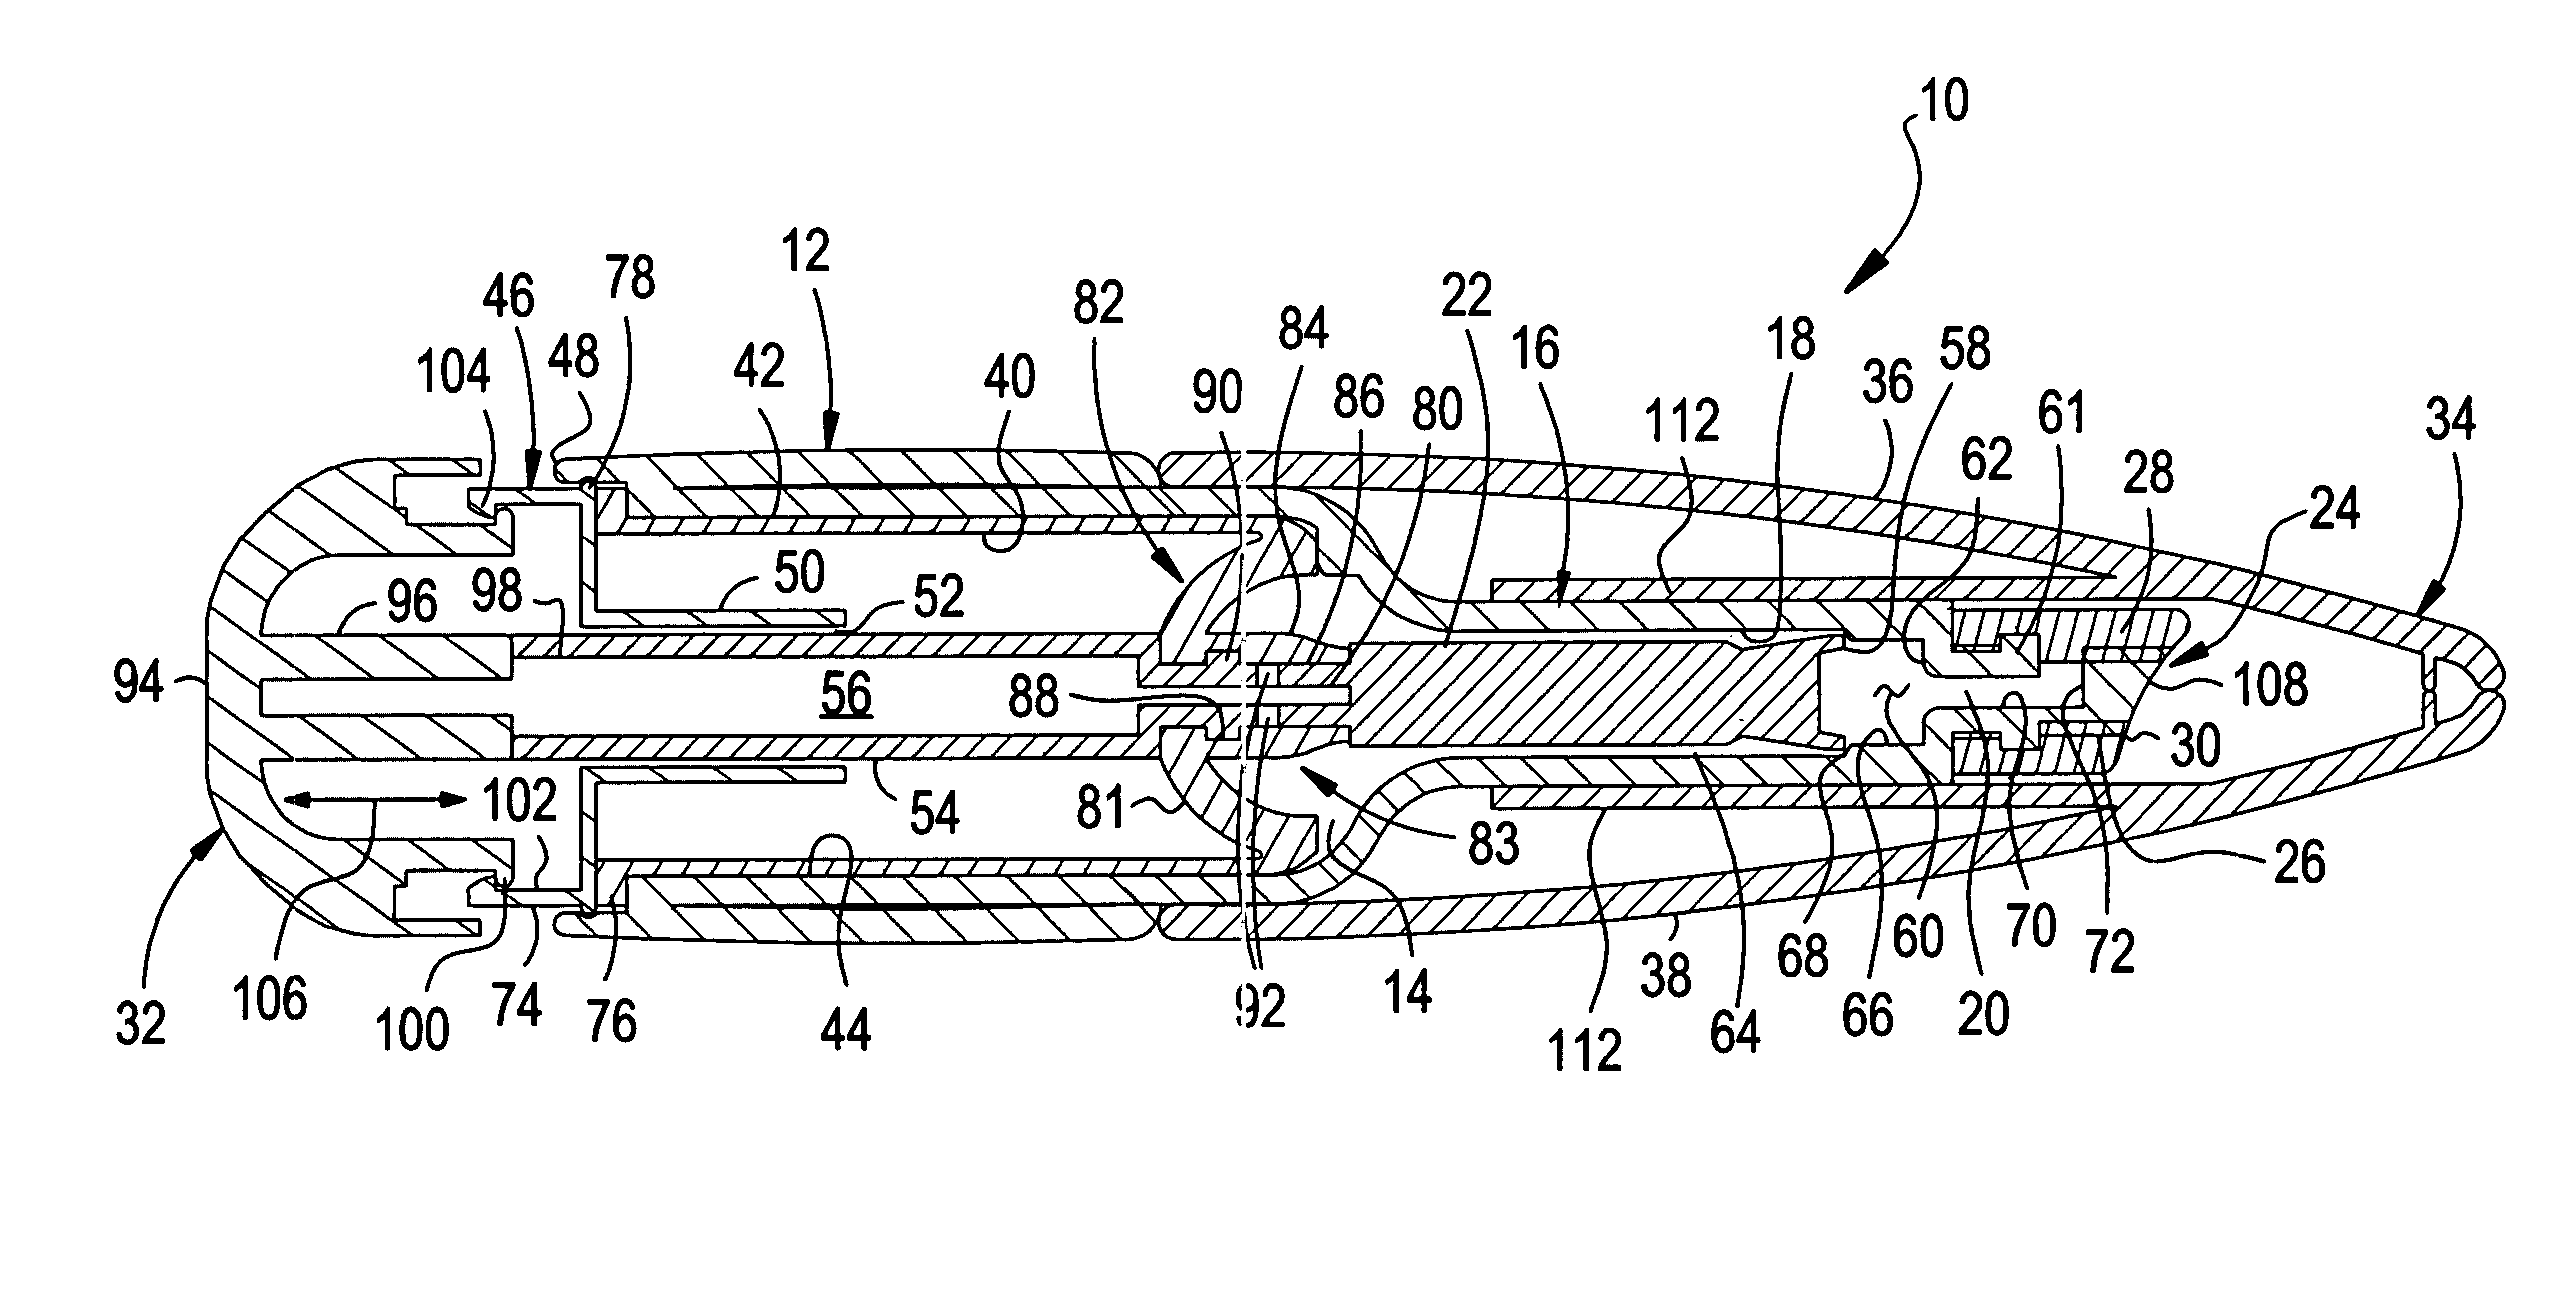 Piston-type dispenser with one-way valve for storing and dispensing metered amounts of substances